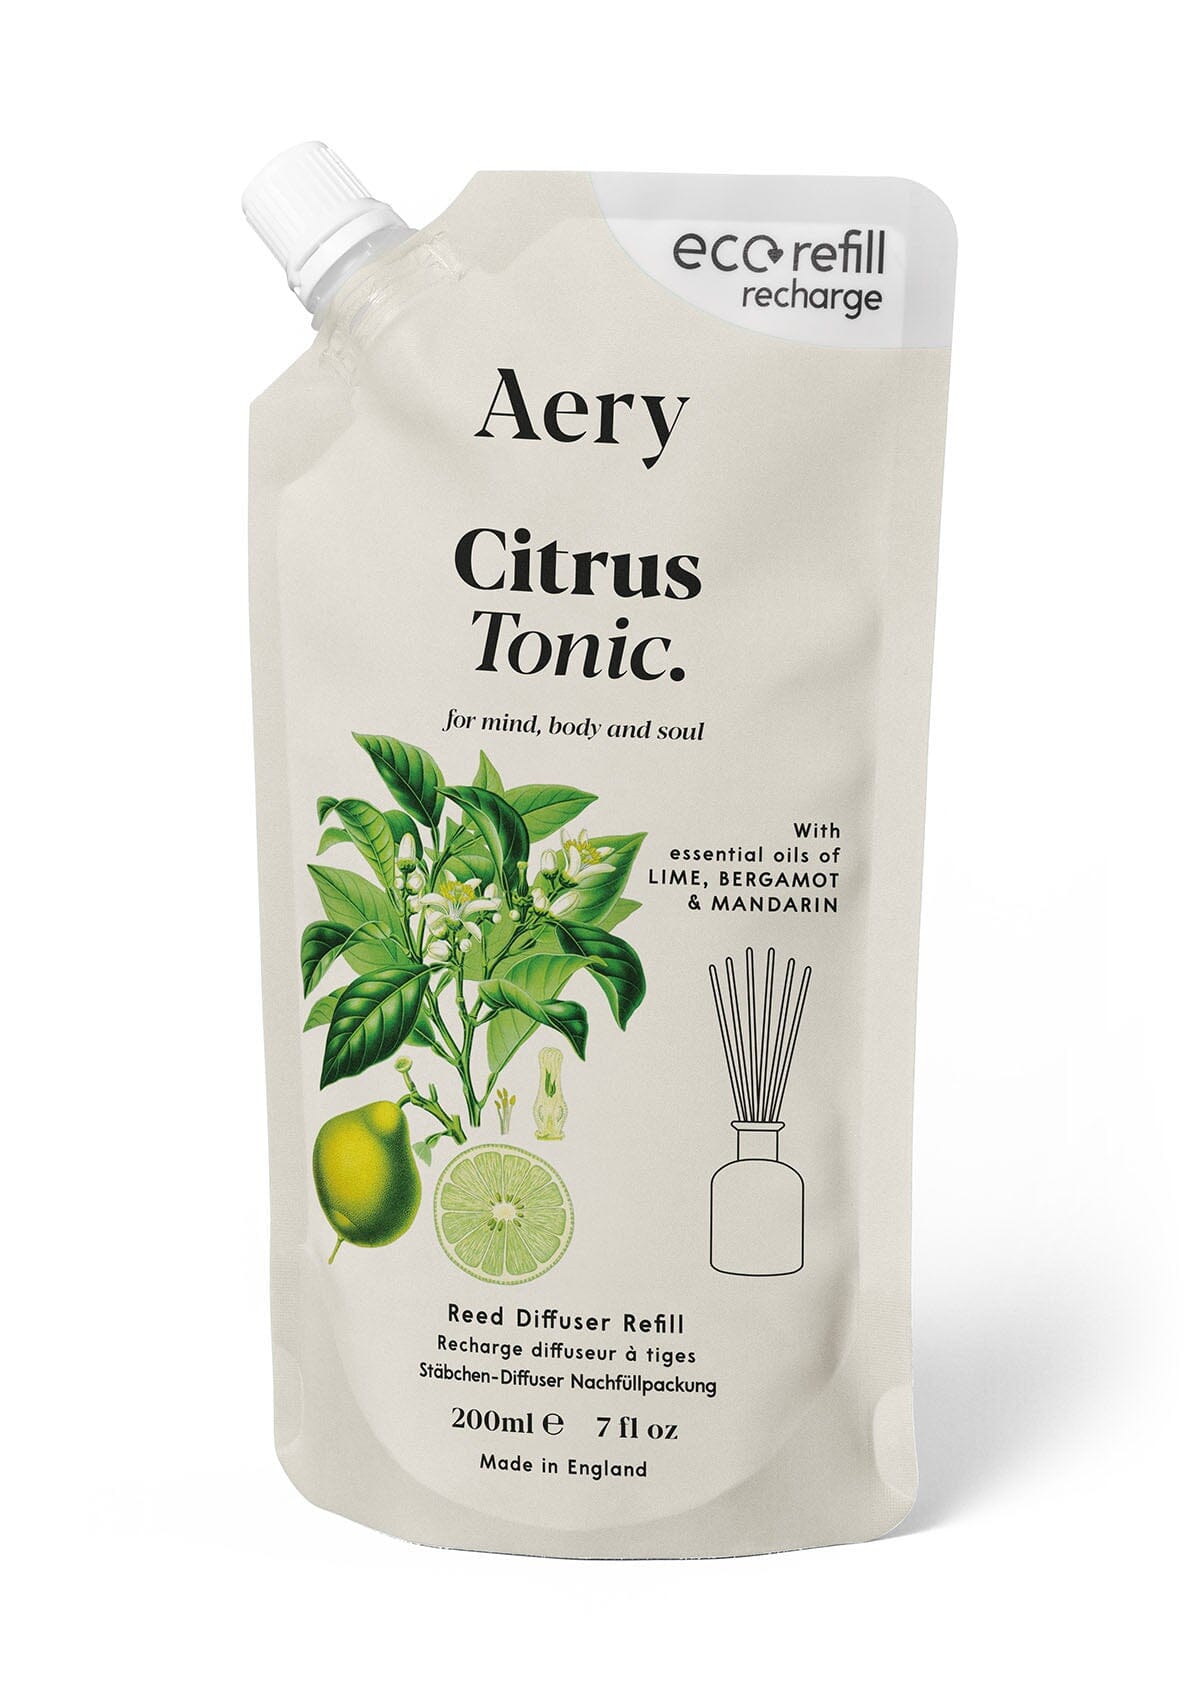 Citrus Tonic reed diffuser refill pouch by aery displayed on white background 